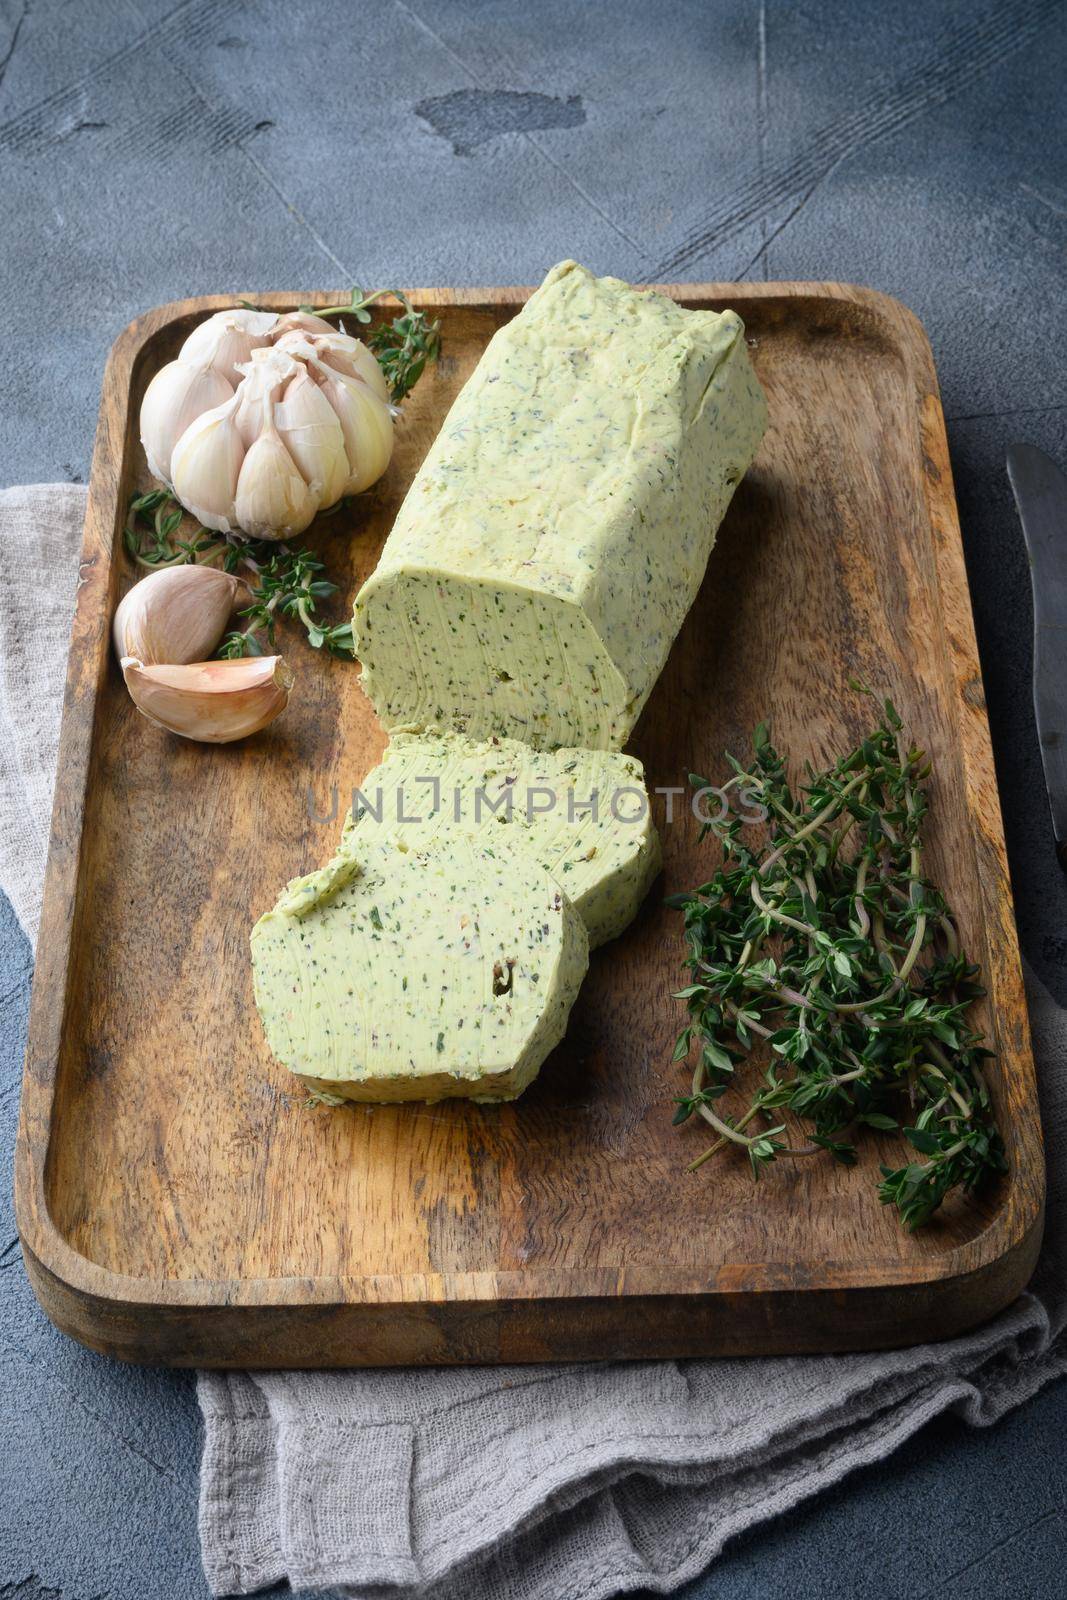 Fresh green herb butter, on gray stone background by Ilianesolenyi